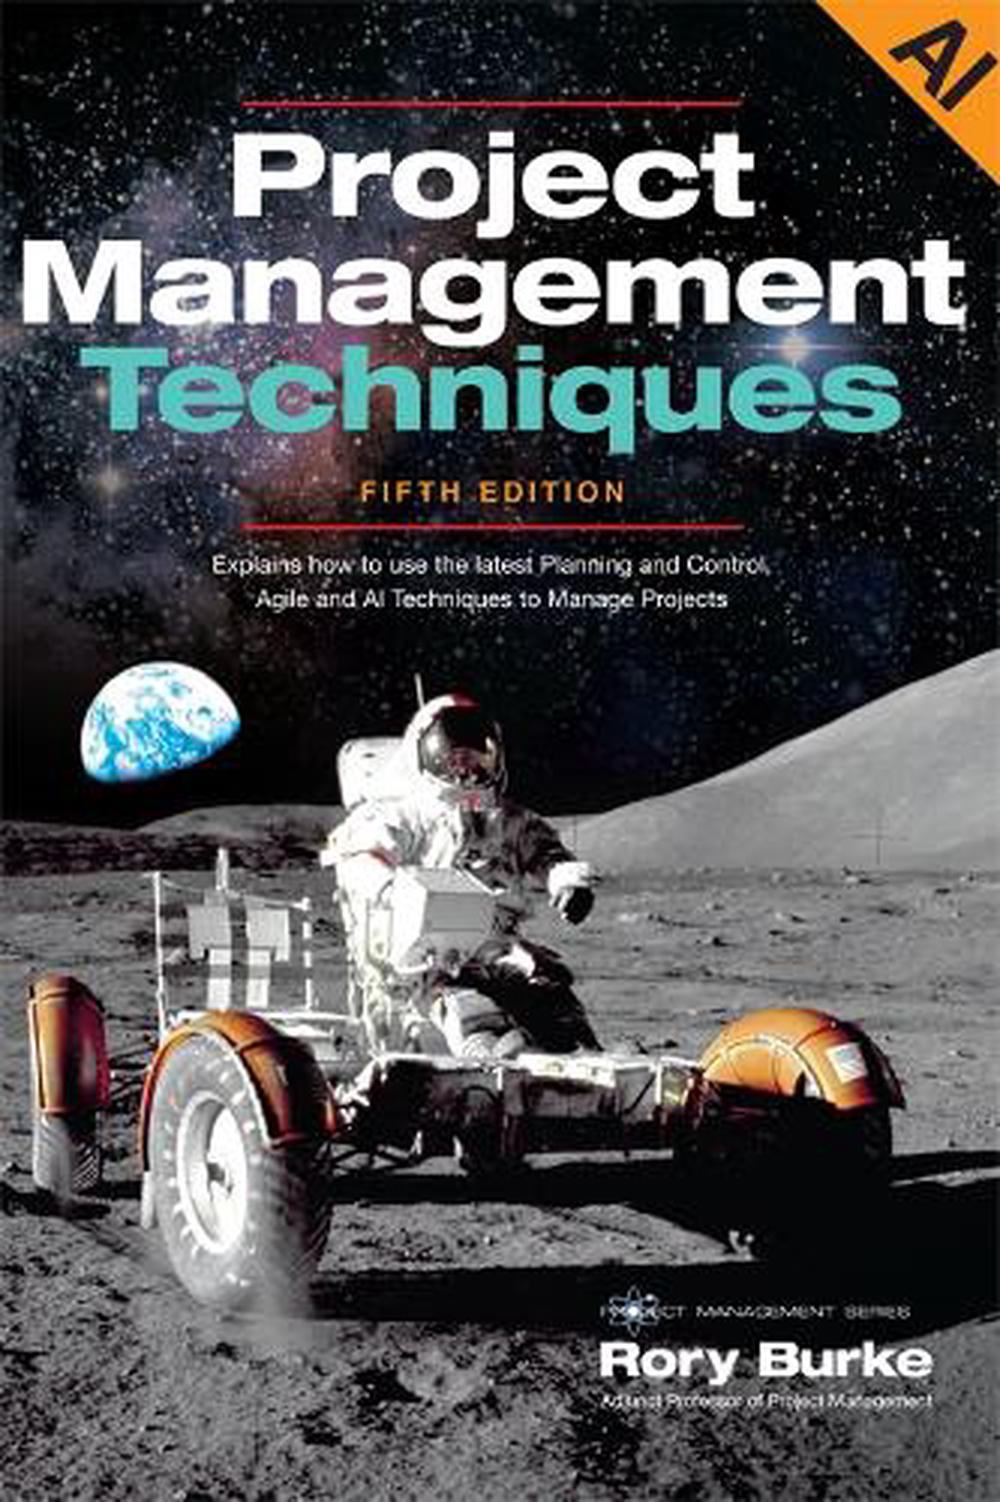 online　by　Project　Burke,　5ed　Paperback,　Buy　9780994149299　Management　at　Techniques　Rory　The　Nile